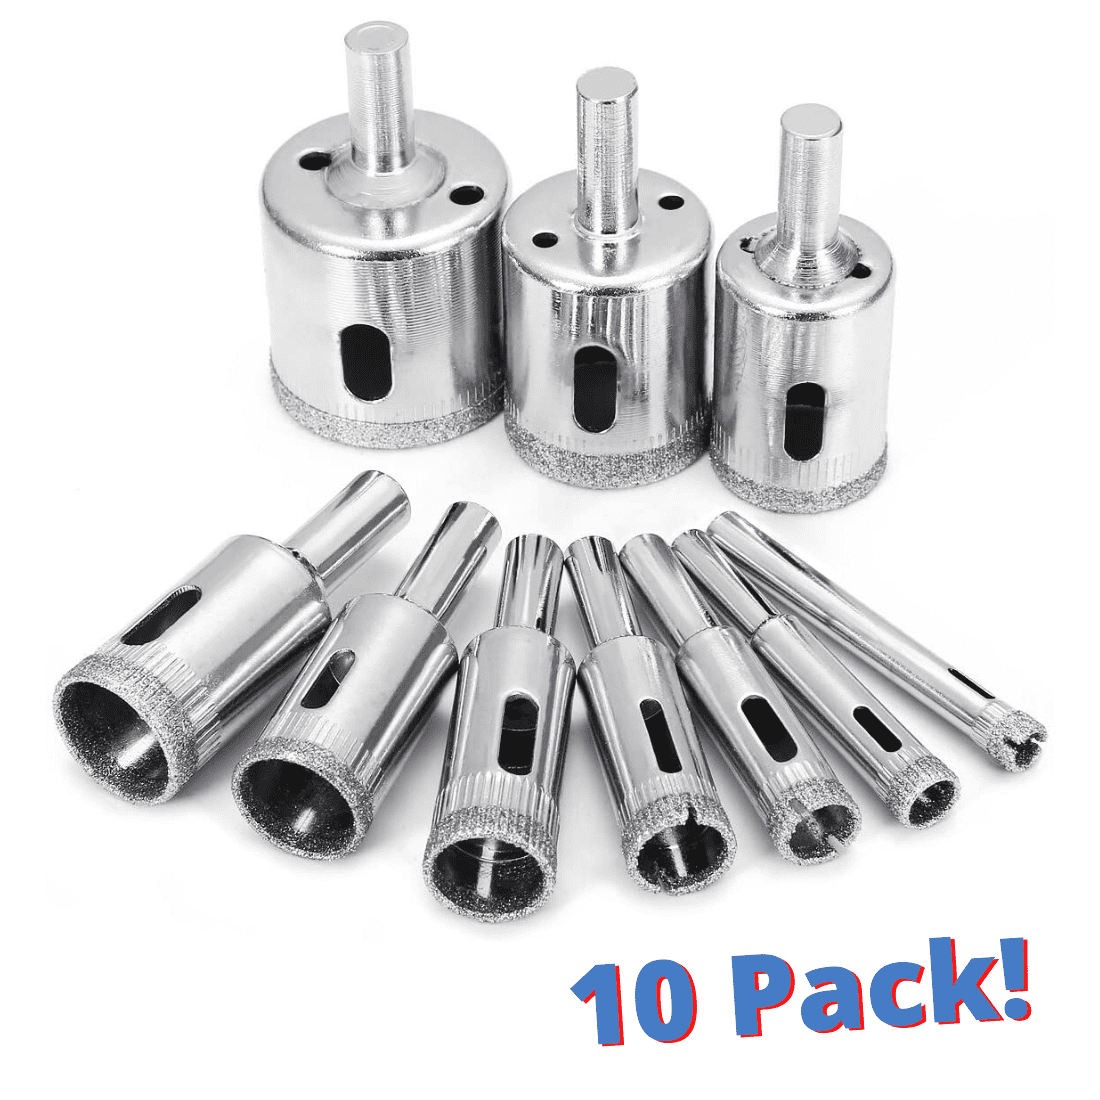 5Pcs Diamond Hole Saw Drill Core Bits Cutter Tool For Marble Tile Stone 6mm~14mm